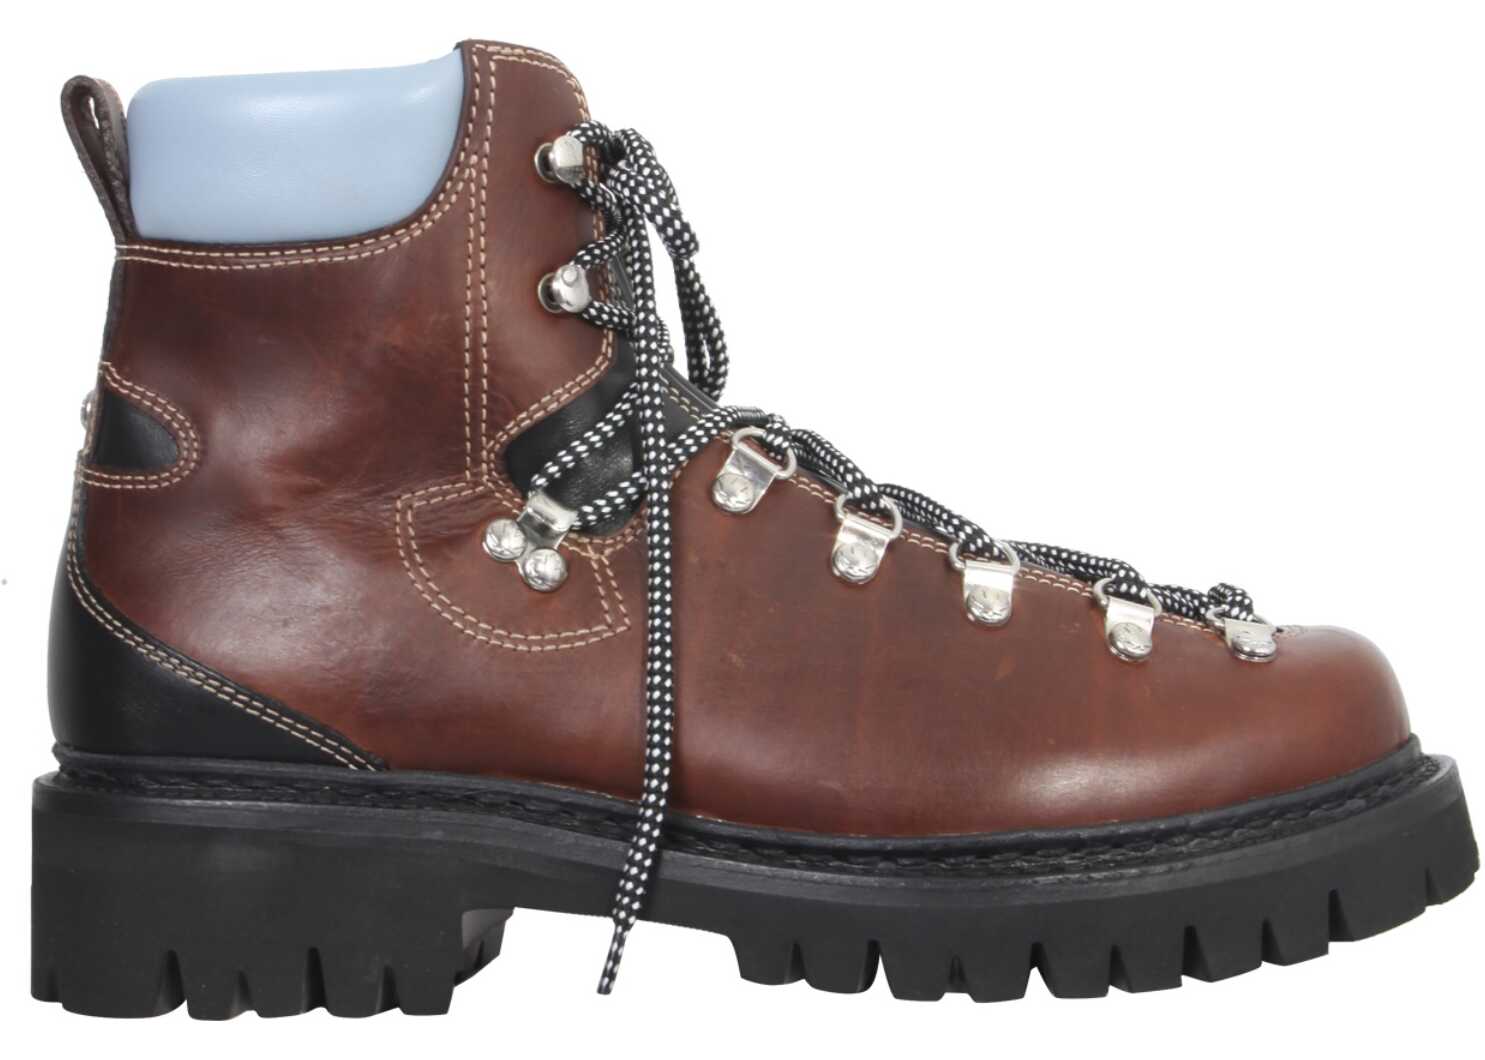 DSQUARED2 New Hiking Boots BROWN b-mall.ro